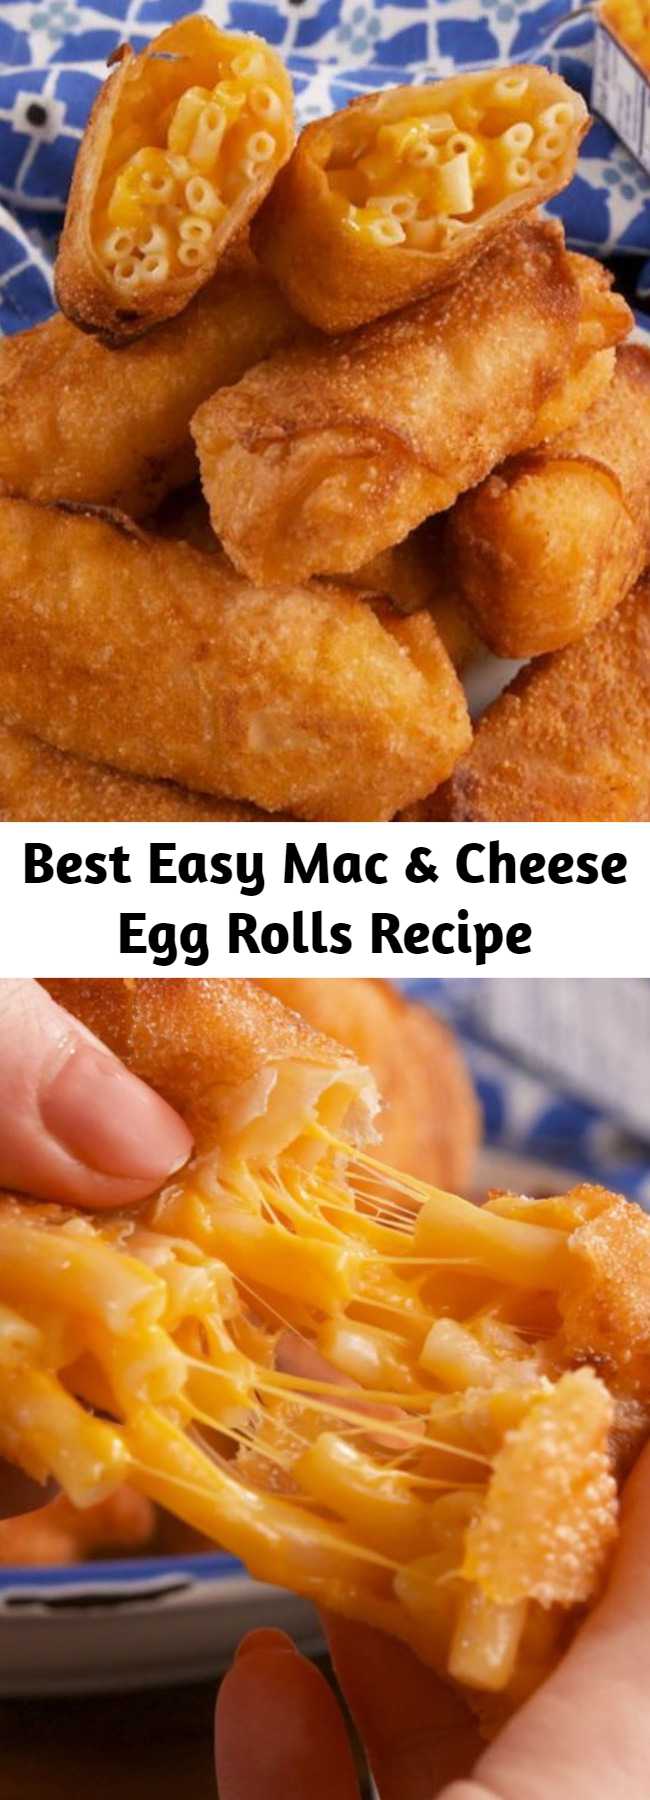 Best Easy Mac & Cheese Egg Rolls Recipe - Turns out the best way to eat mac & cheese is fried inside an egg roll wrapper. #easy #recipe #kids #kidfriendly #fried #cheese #cheesy #mac #macncheese #macaroni #eggroll #eggrolls